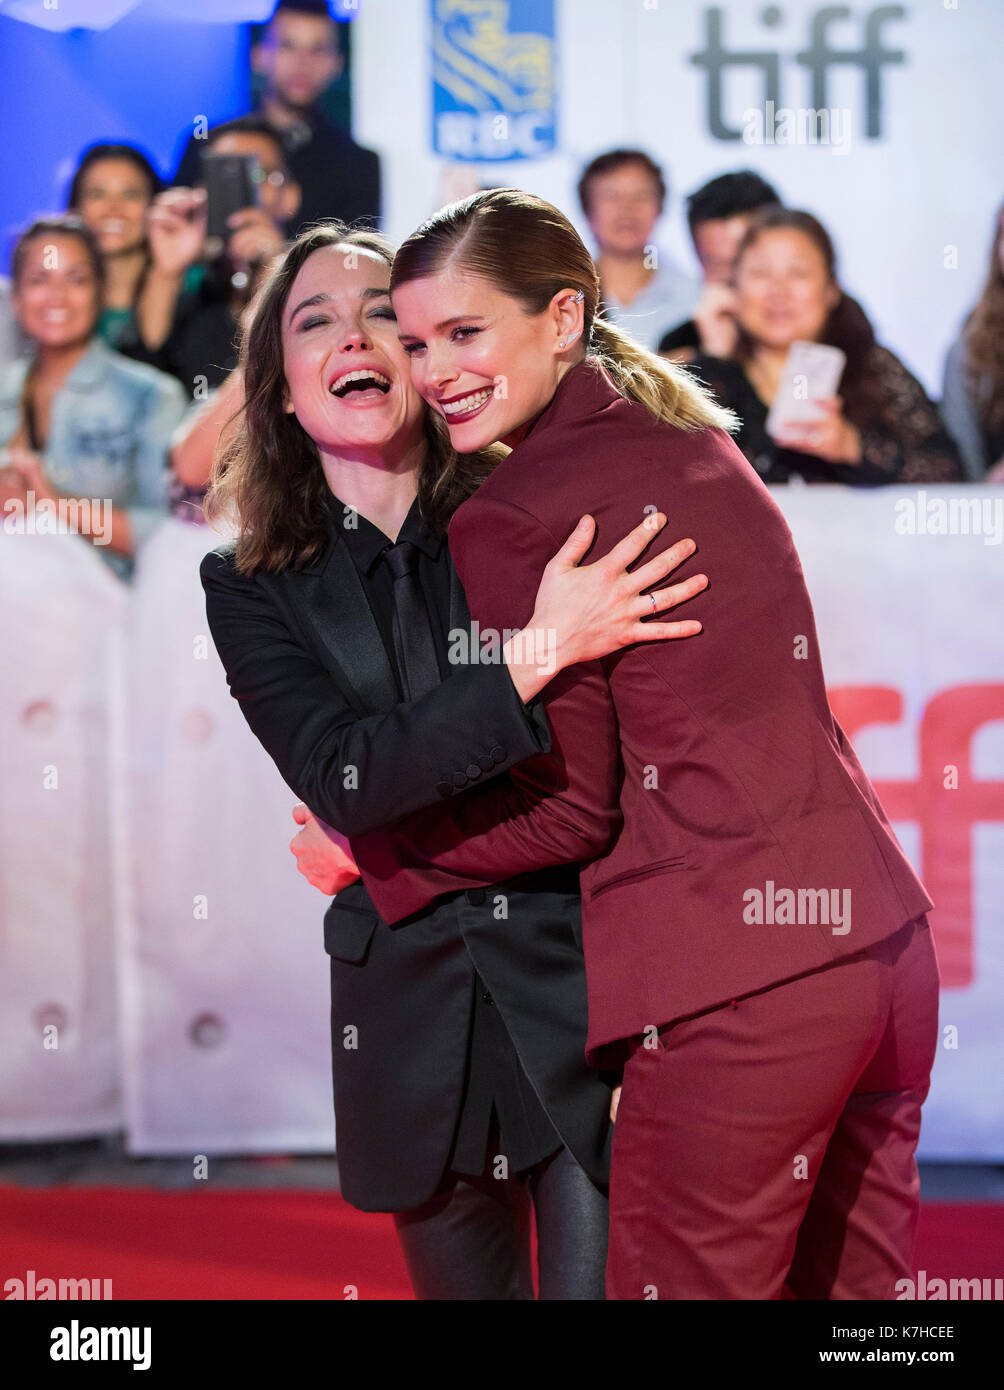 Toronto, Canada. 15th Sep, 2017. Actresses Ellen Page (L) and Kate Mara  pose for photos during the world premiere of the film "My Days of Mercy" at  Roy Thomson Hall during the